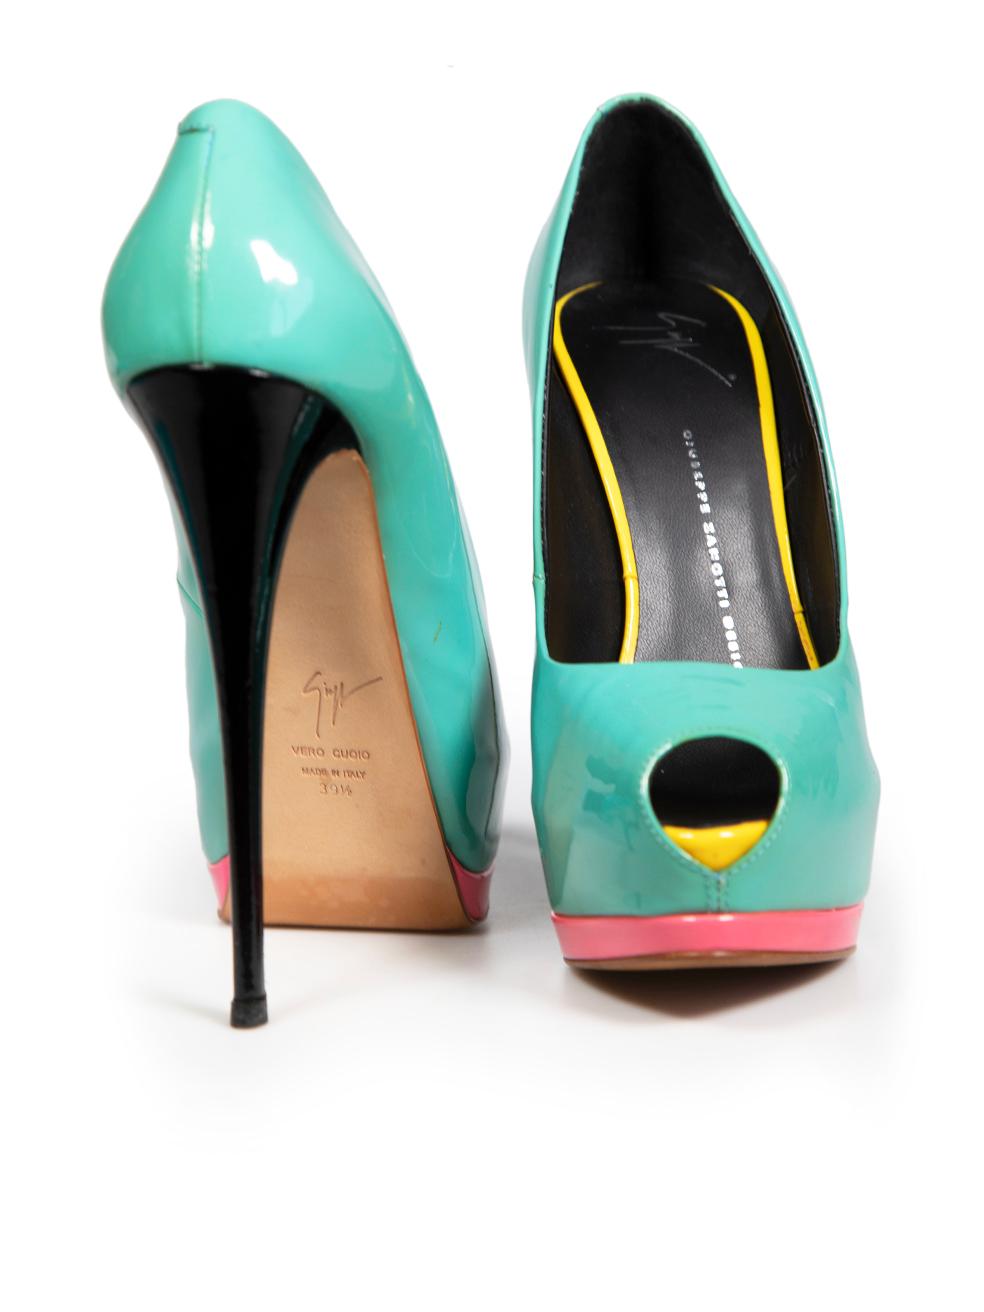 Giuseppe Zanotti Turquoise Patent Platform Heels Size IT 39.5 In Good Condition For Sale In London, GB